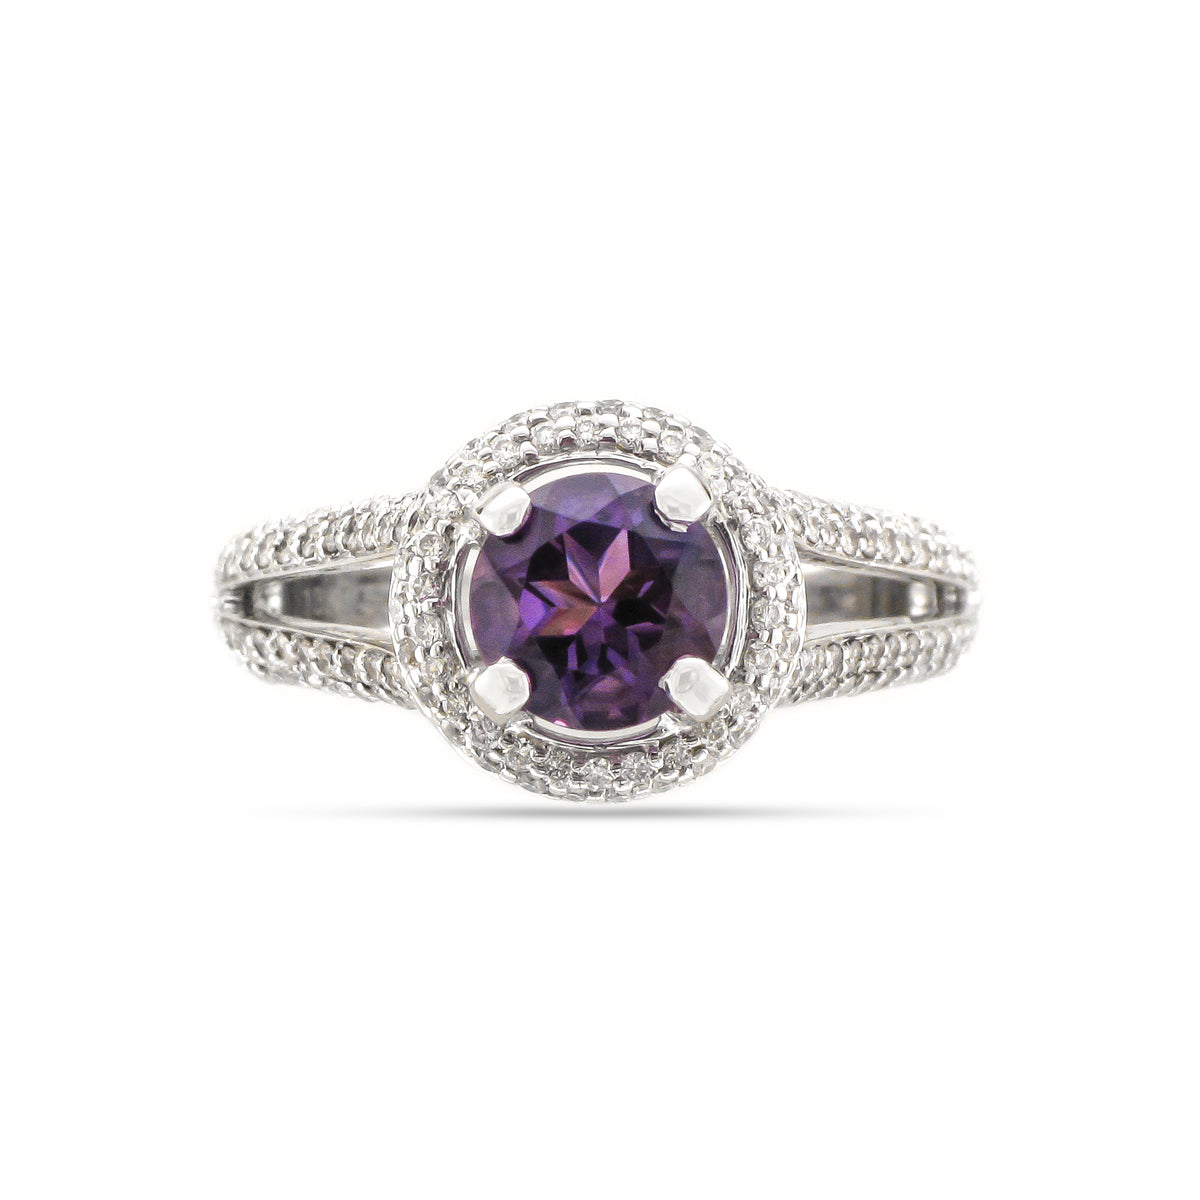 Vintage 18ct White Gold Amethyst and Diamond Ring